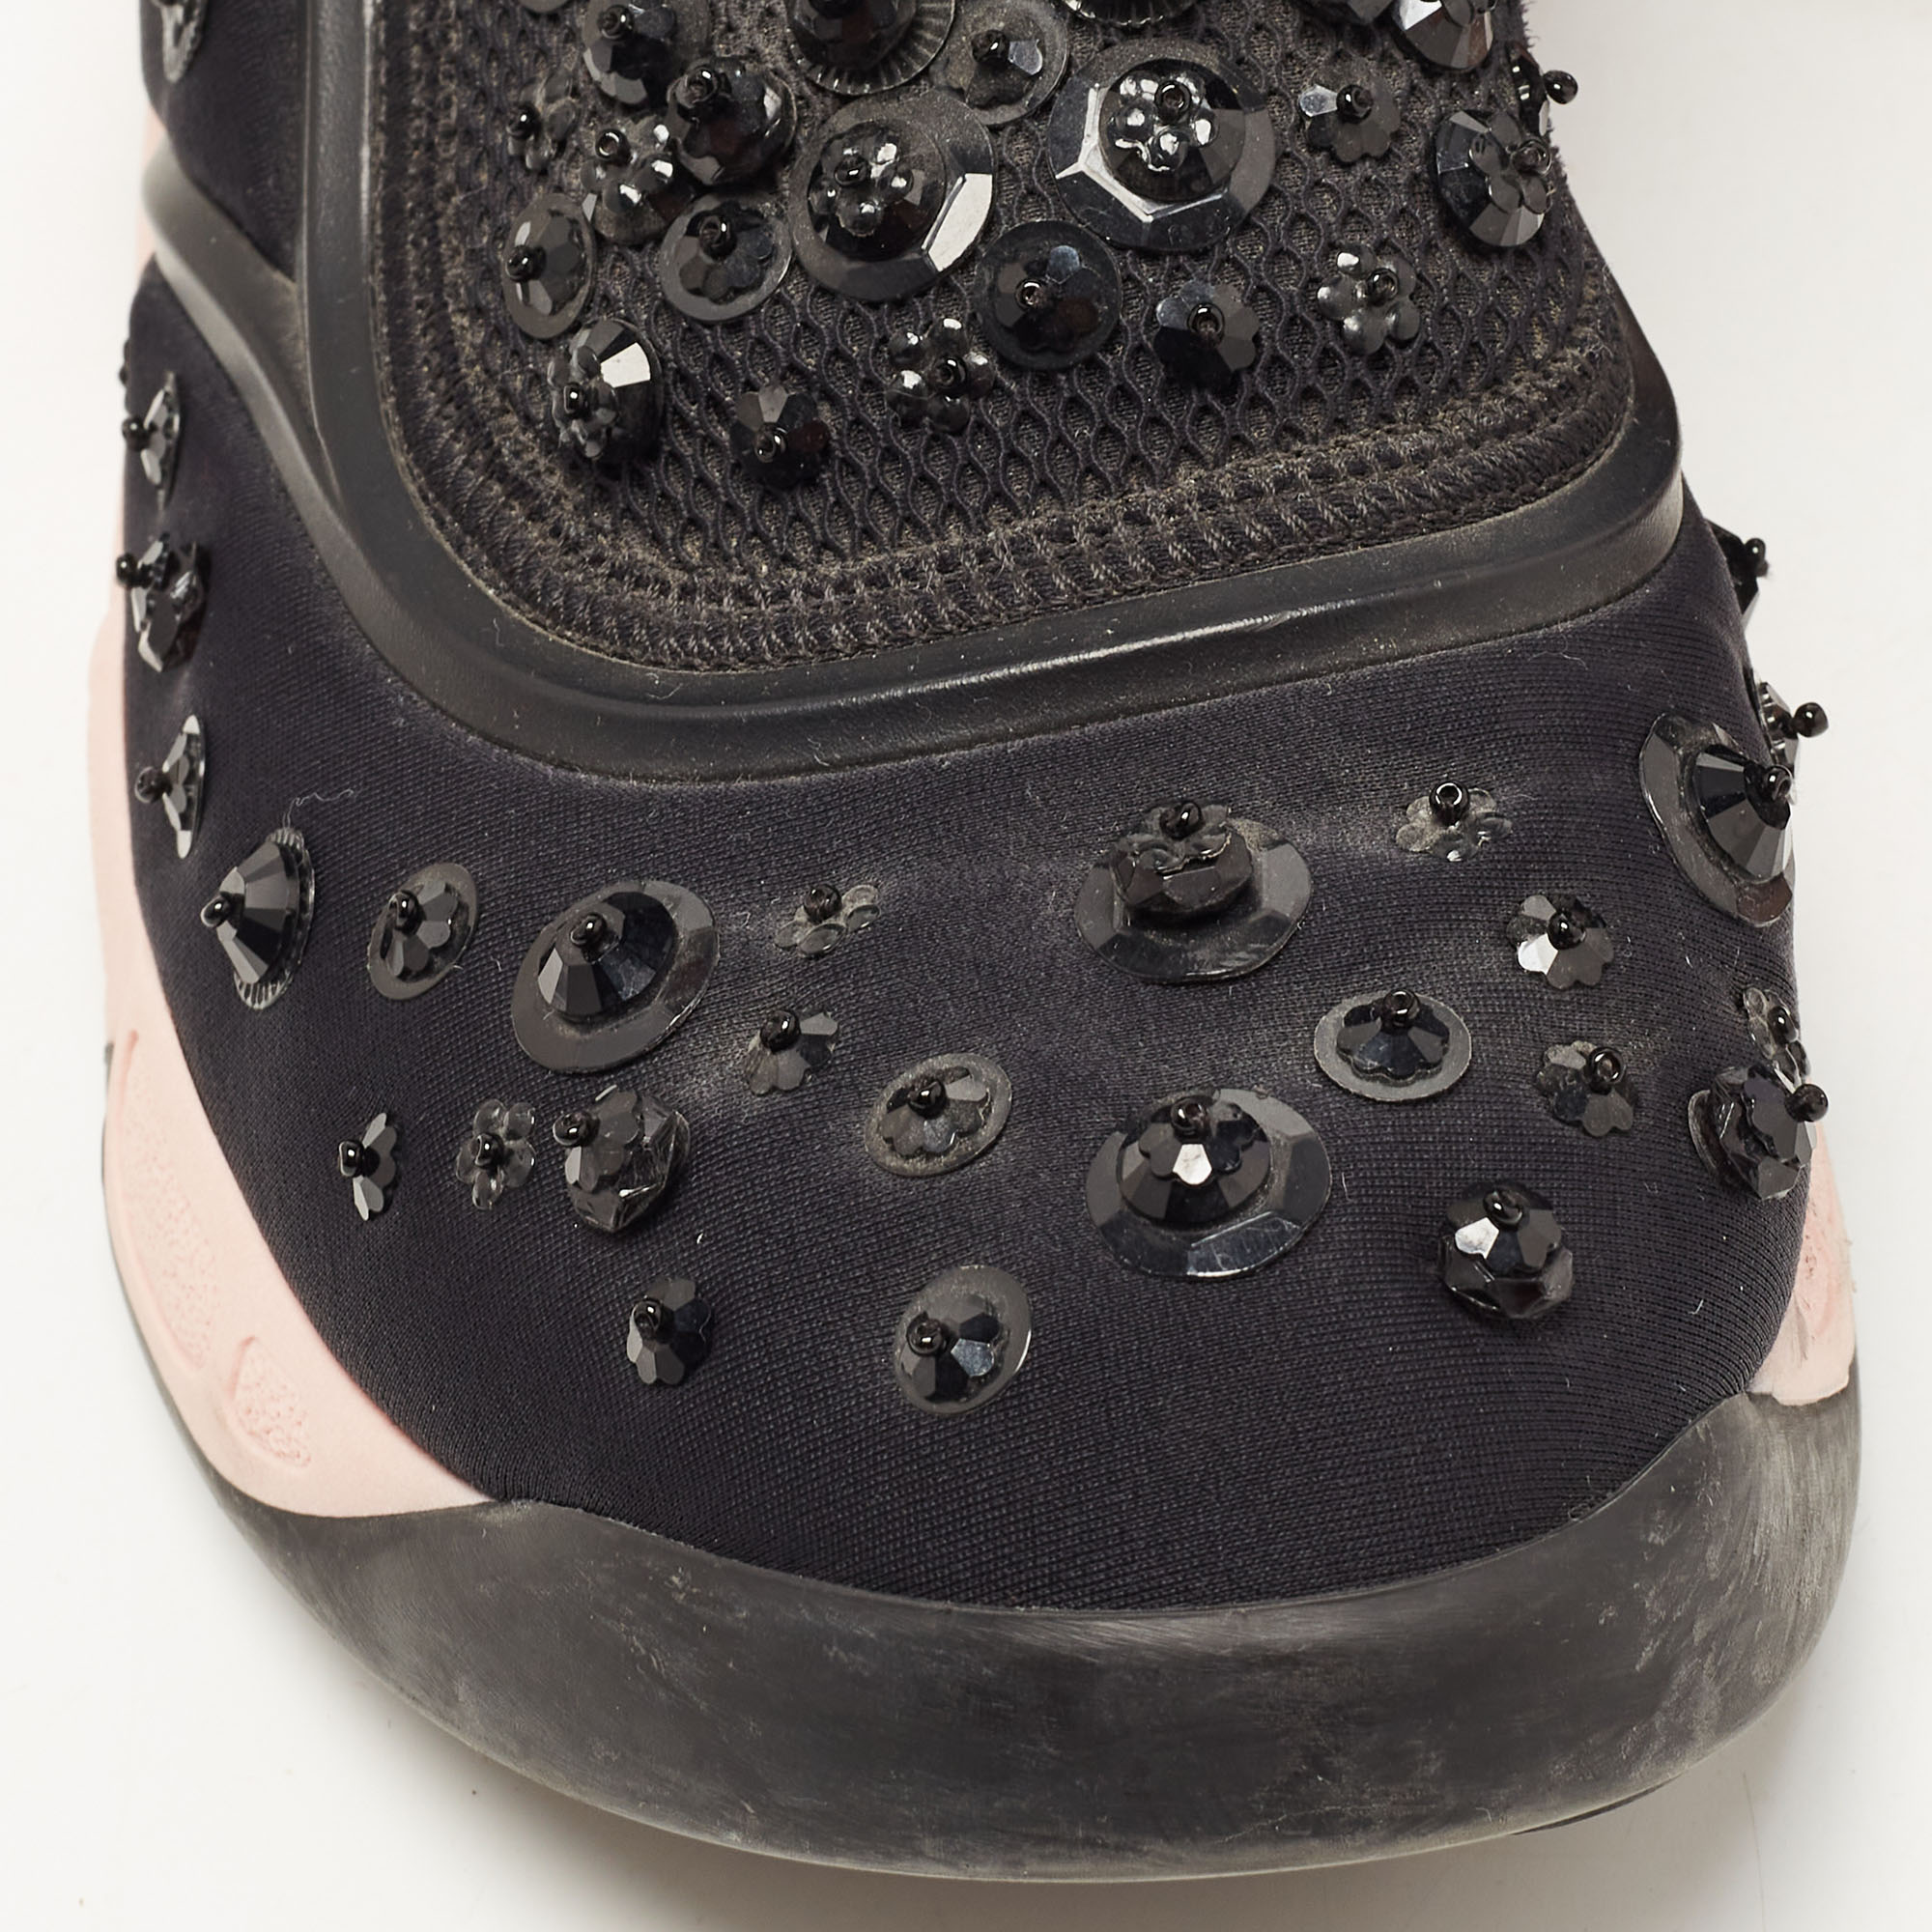 Dior Black Neoprene And Mesh Fusion Embellished Velcro Strap Sneakers Size 37.5